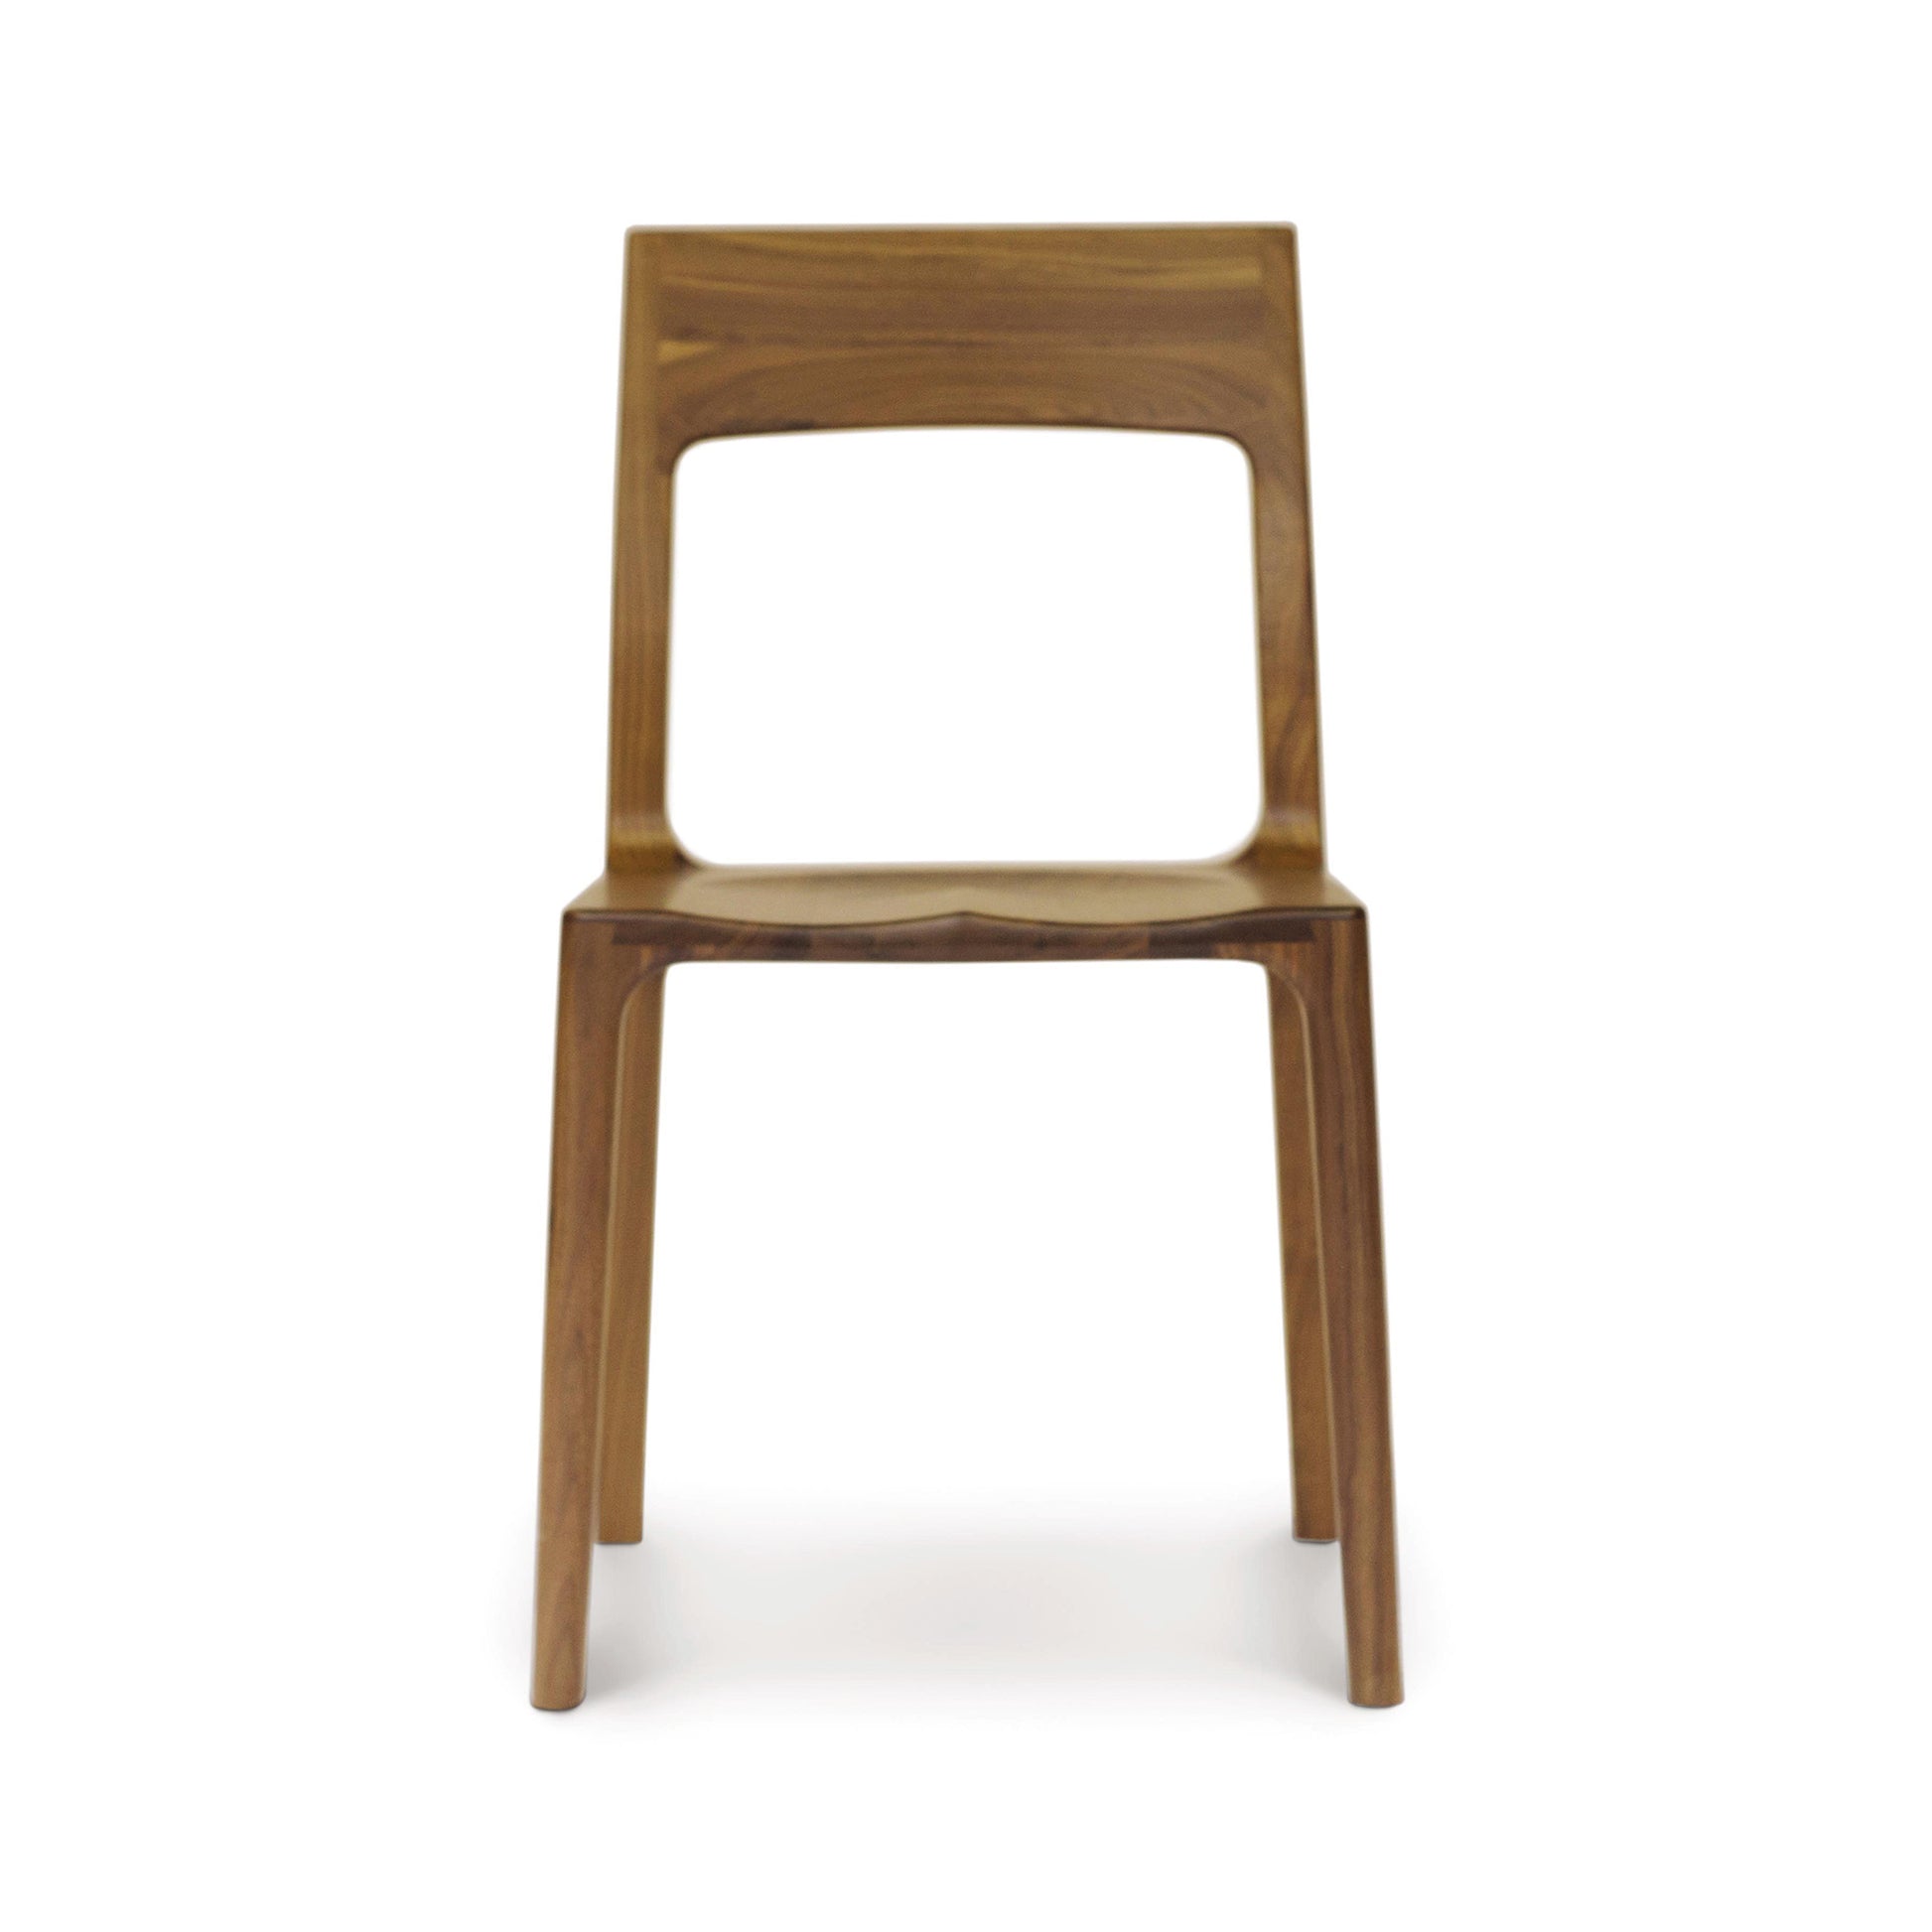 A modern walnut Lisse Dining Chair from the Copeland Furniture Collection, featuring a square cut-out in the backrest, isolated on a white background.